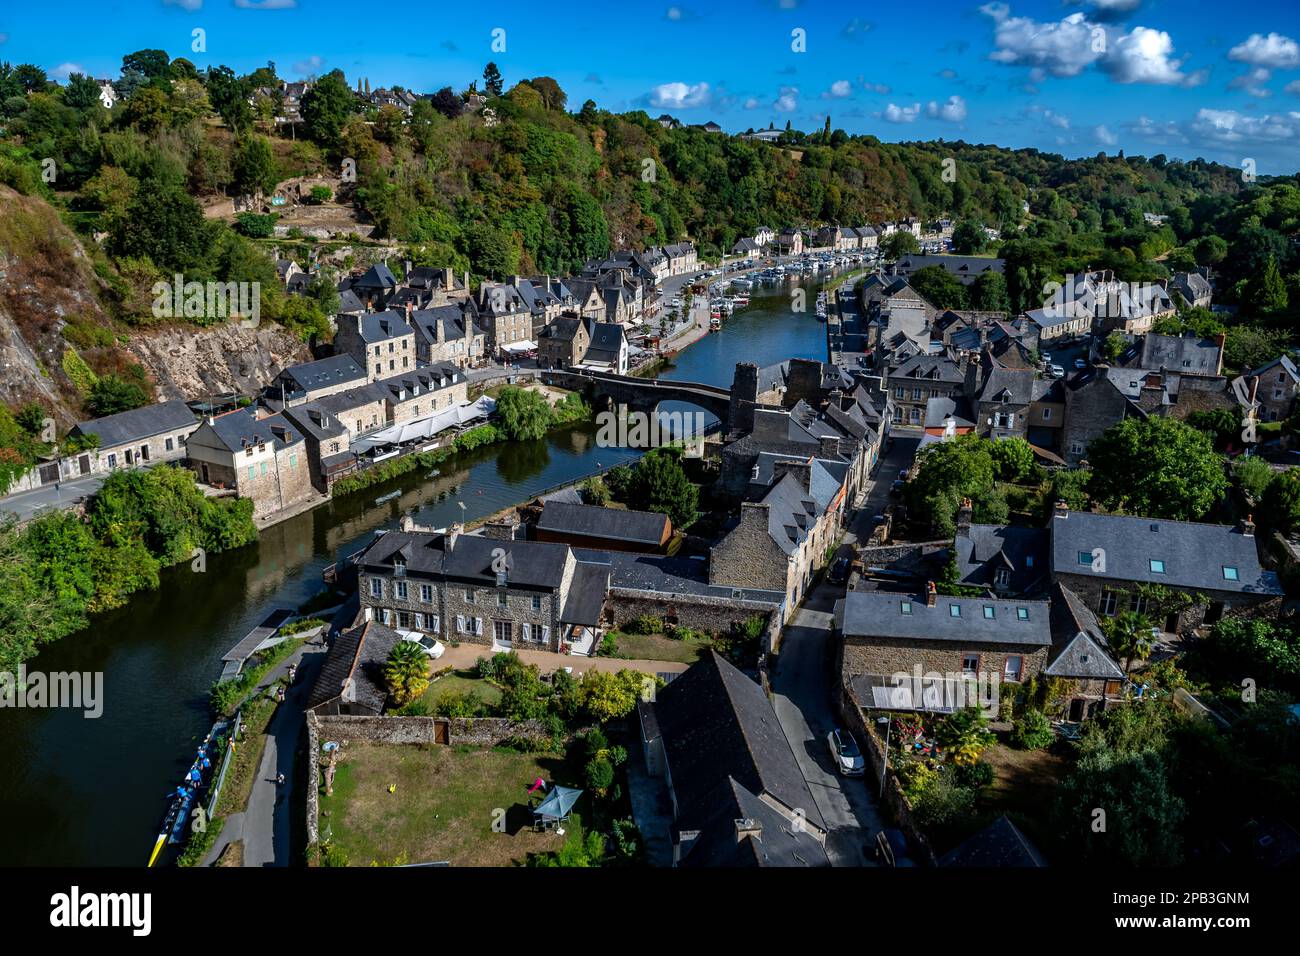 Breton Village Dinan With Half-Timbered Houses And River La Rance In Department Ille et Vilaine In Brittany, France Stock Photo